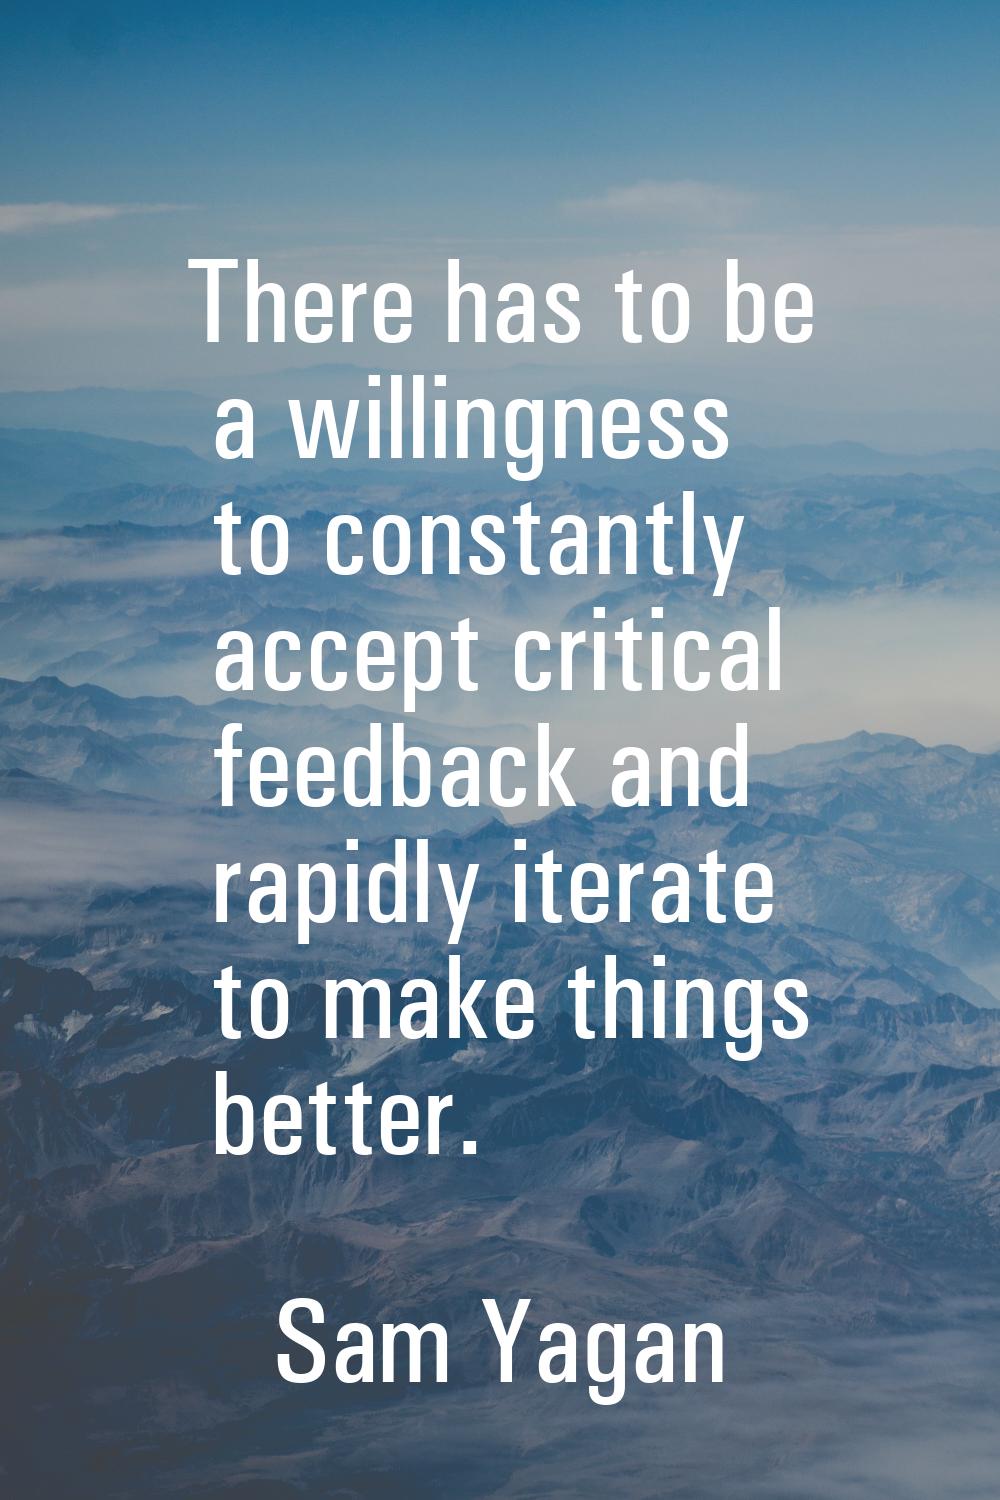 There has to be a willingness to constantly accept critical feedback and rapidly iterate to make th